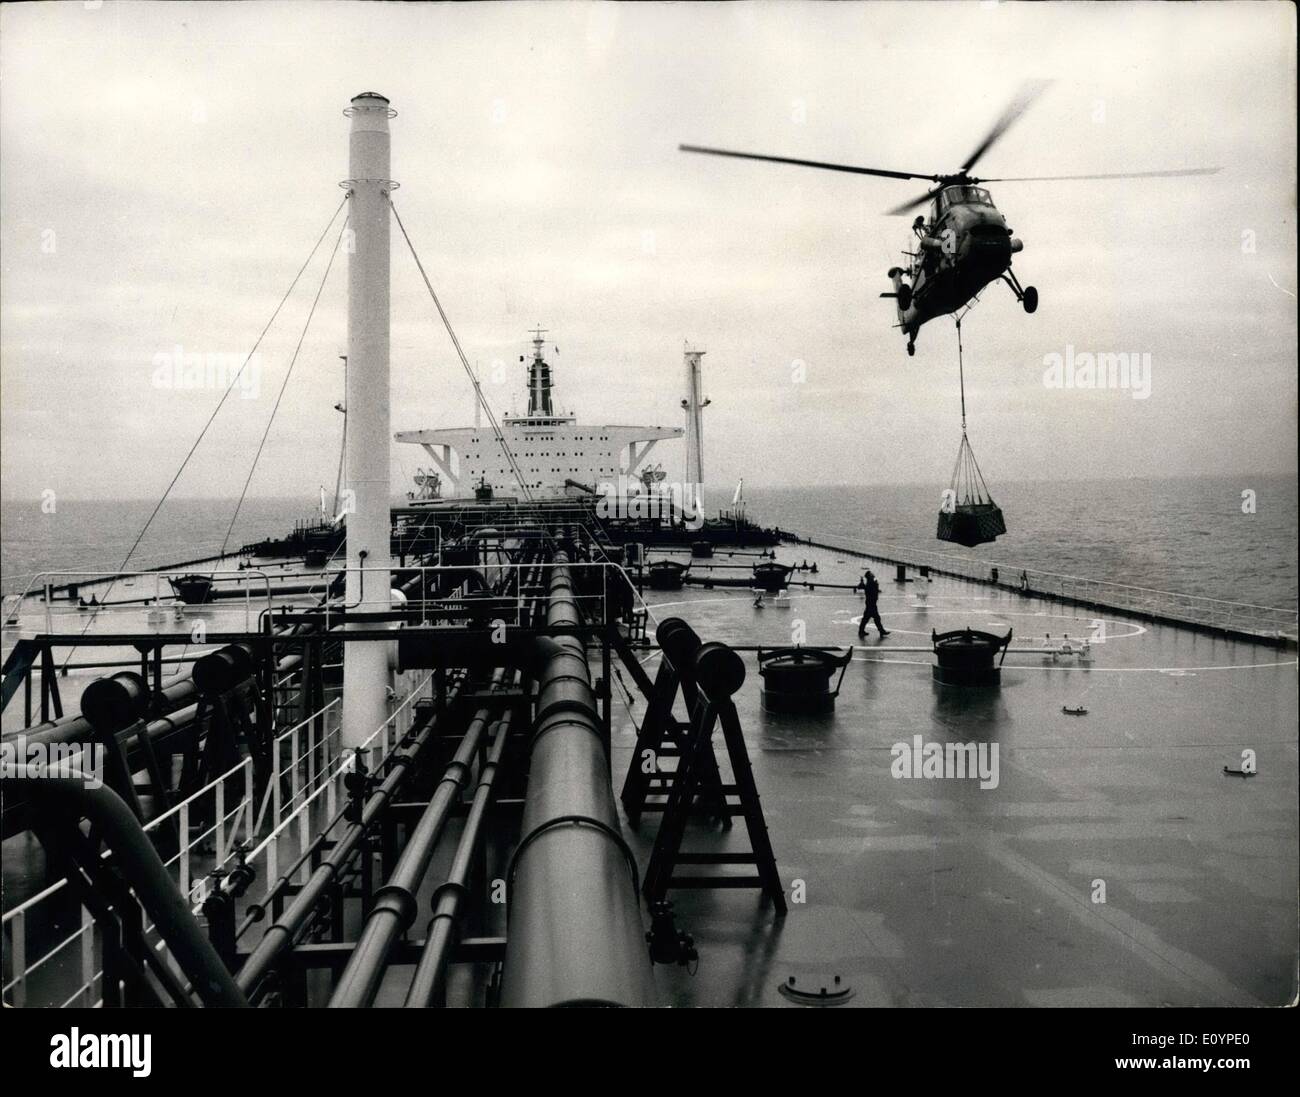 Feb. 02, 1971 - News service for tanker.: Radio and amchinery to print automatically a washeet for the new of BP's tanker, British 215,000 tons, were lowered aboard by in the English Channel ysterday. the tanker tomorrow on a tow-month voyage to the Persian Gu back. The Daily Telegraph is providing the news. Photo shows an R.A.F. Wessex helicopter lowering radio equipmkent on board the BP tanker British Explorer, in the English Channel yesterday. Stock Photo